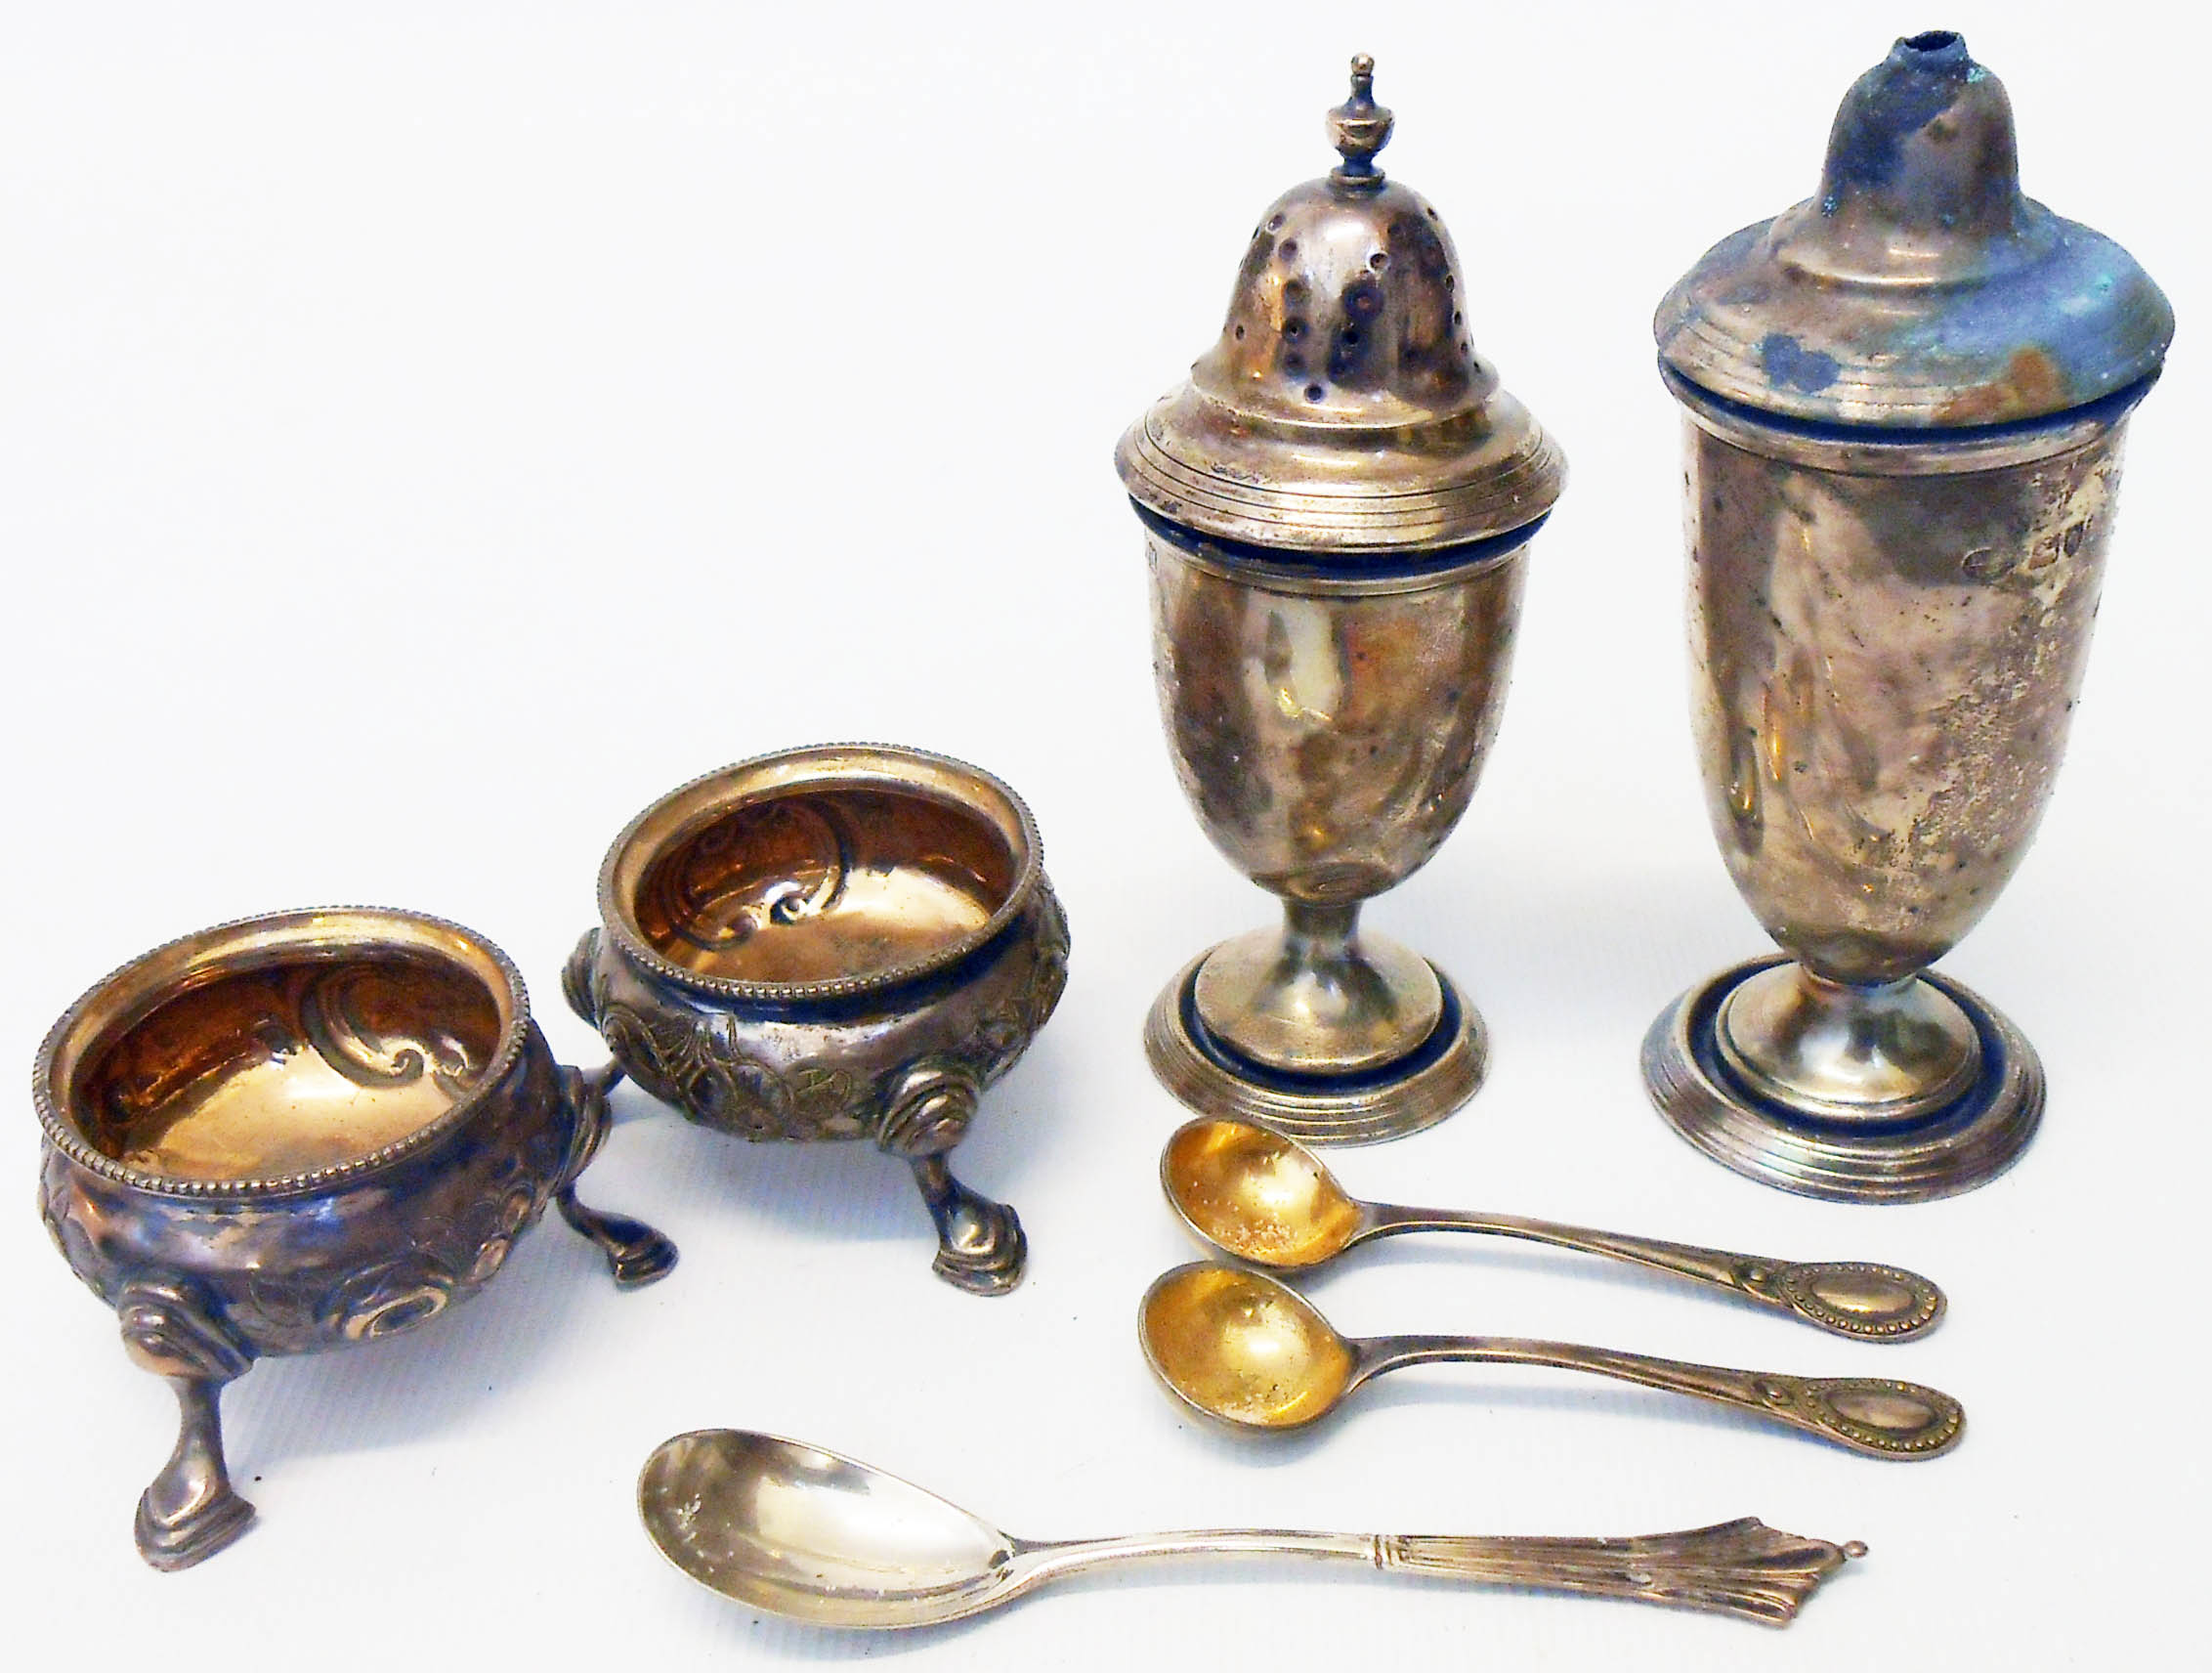 A pair of silver salts - London 1845 - sold with three condiment spoons, silver pepperette and salt